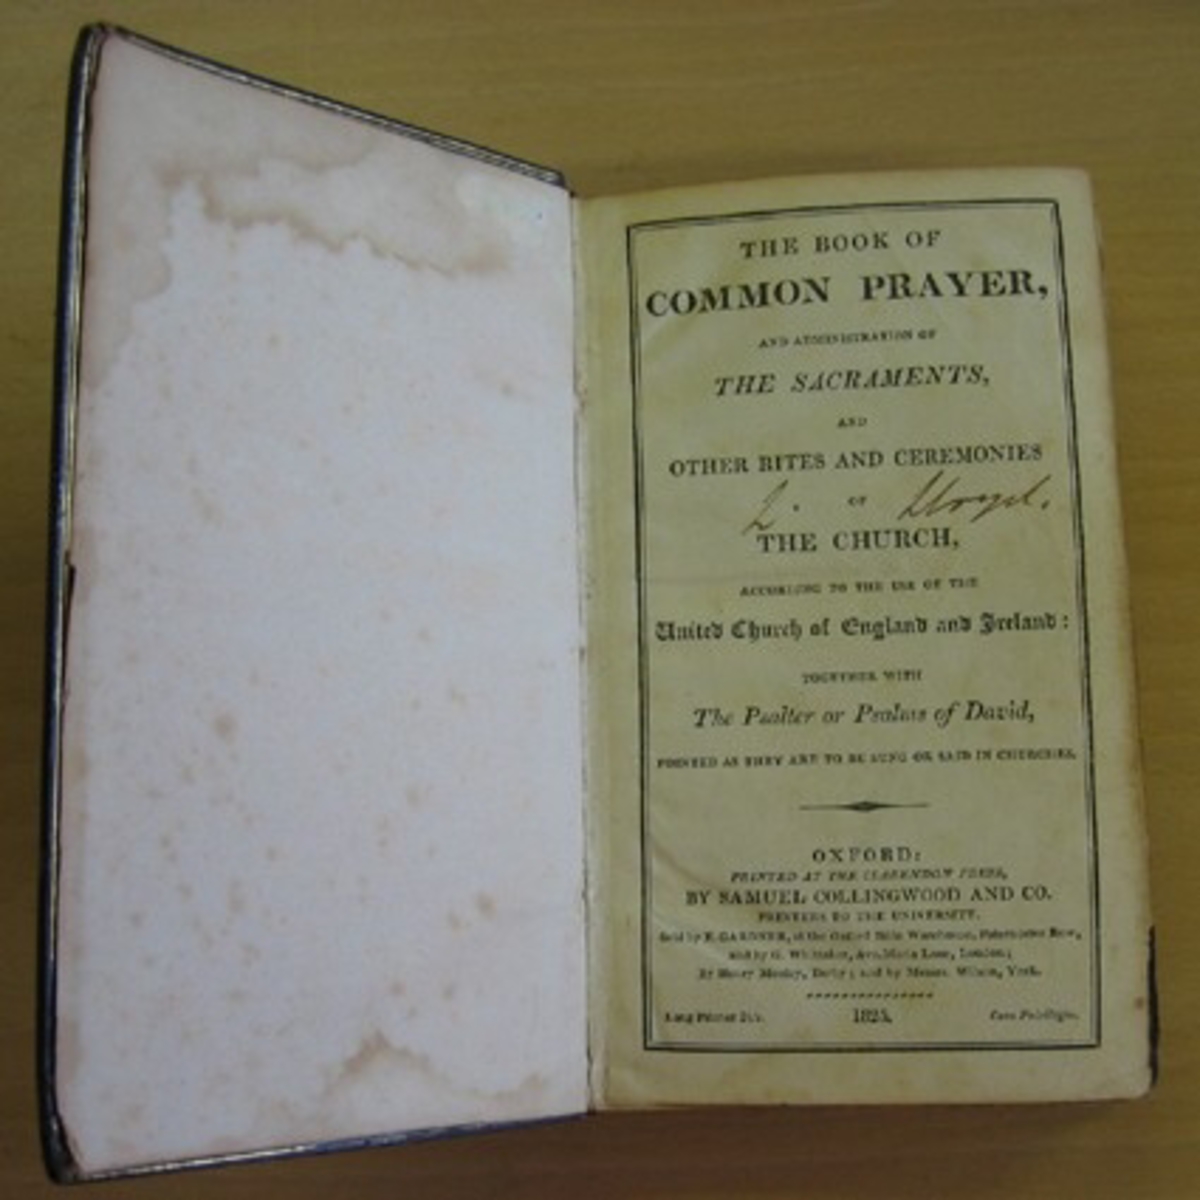 BOK: The book of common Prayer and administration of the sacramants and other rites and ceremonies of the church. The Psalter or Psalter of David. Oxford 1825.

Fyra böcker, (inbundna) som tillhört Lloyd.